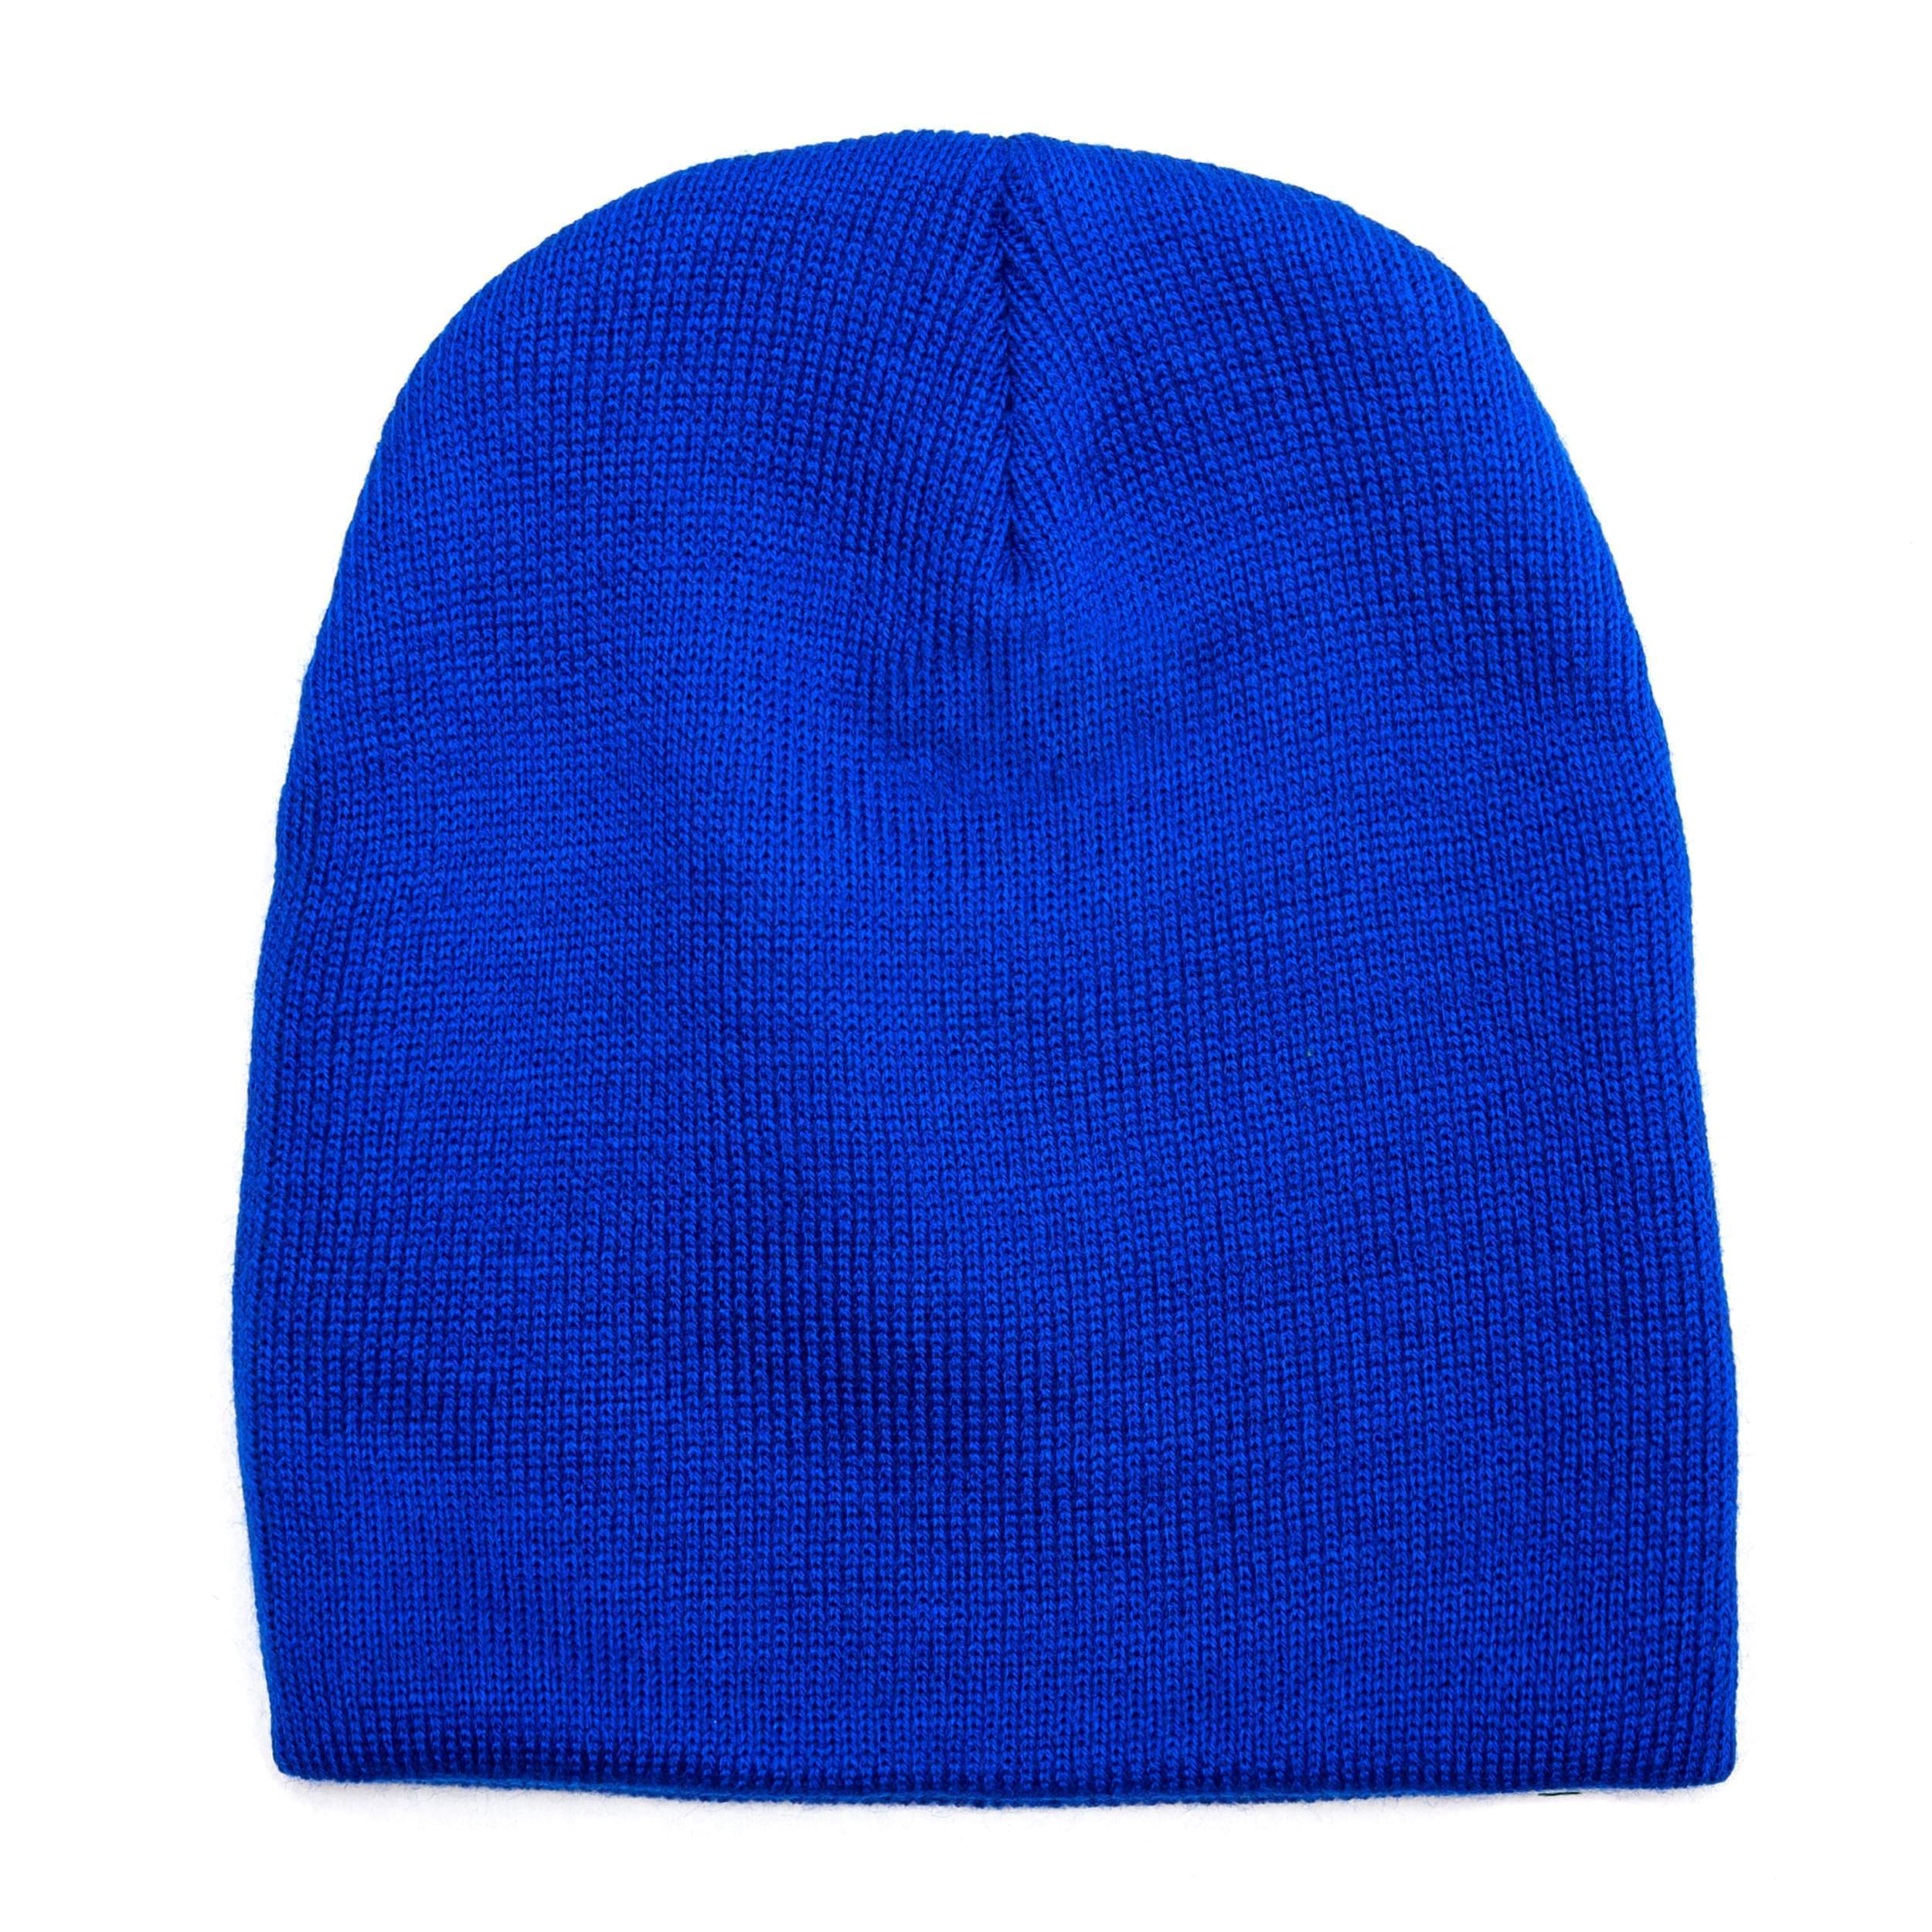 Union Made in USA Made Winter Knit Acrylic Beanie Hat by Unionwear